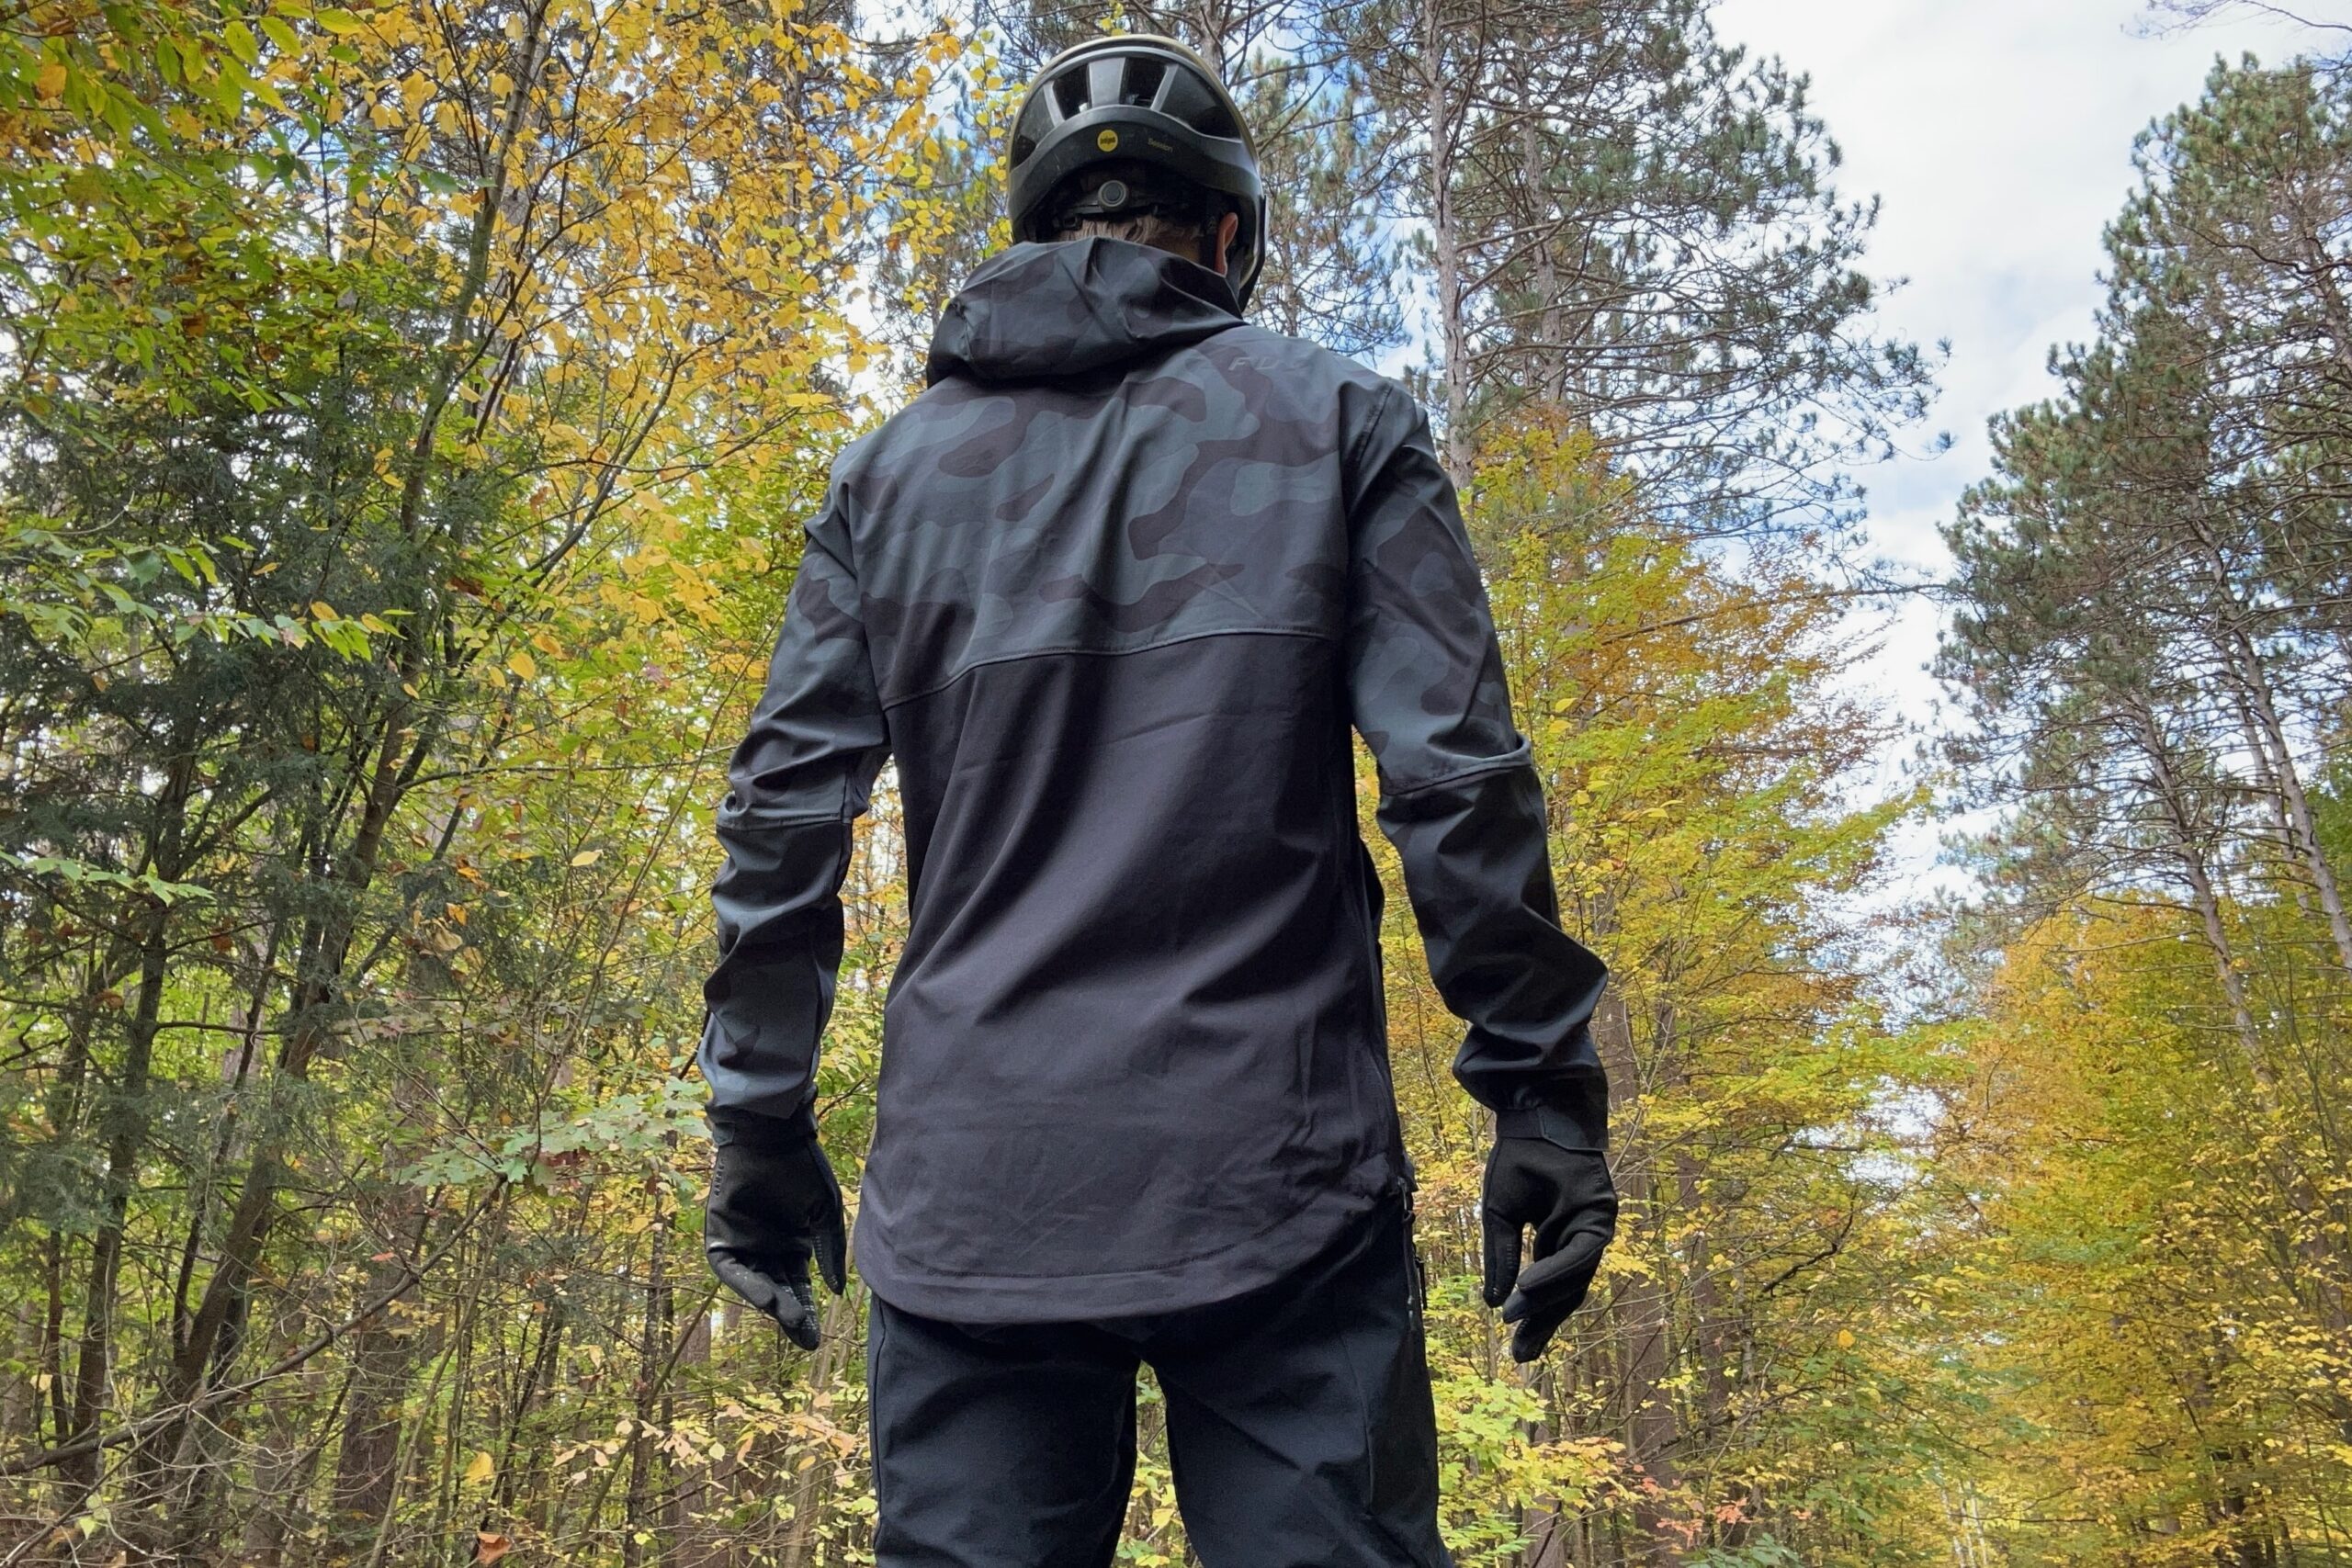 The Fox Ranger Wind Pullover seen from the back to demonstrate fit